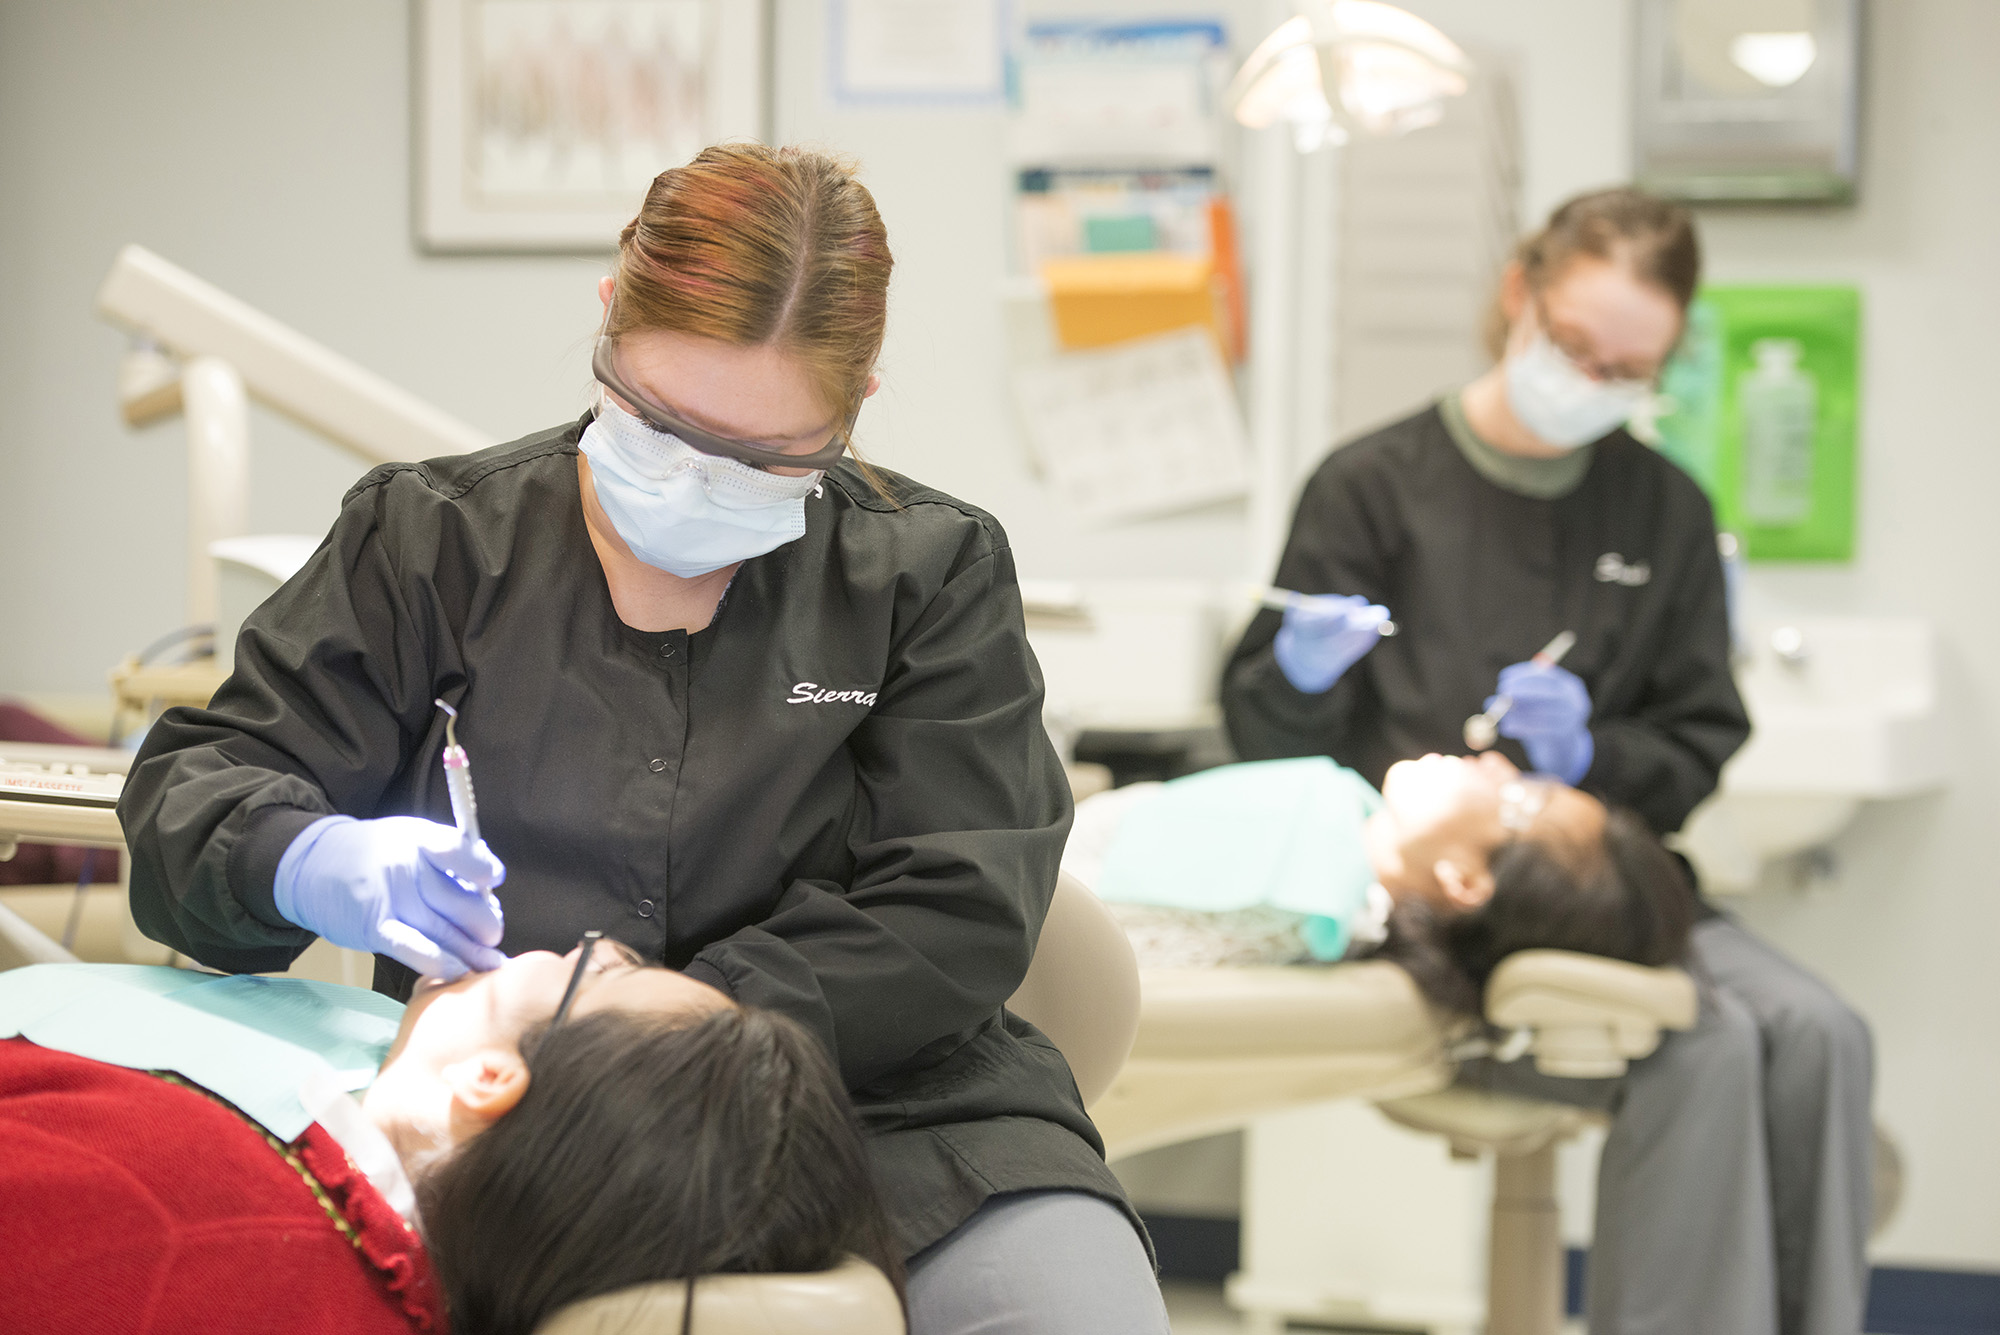 Dental Hygiene students clean other students' teeth in the Dental Hygiene Clinic.